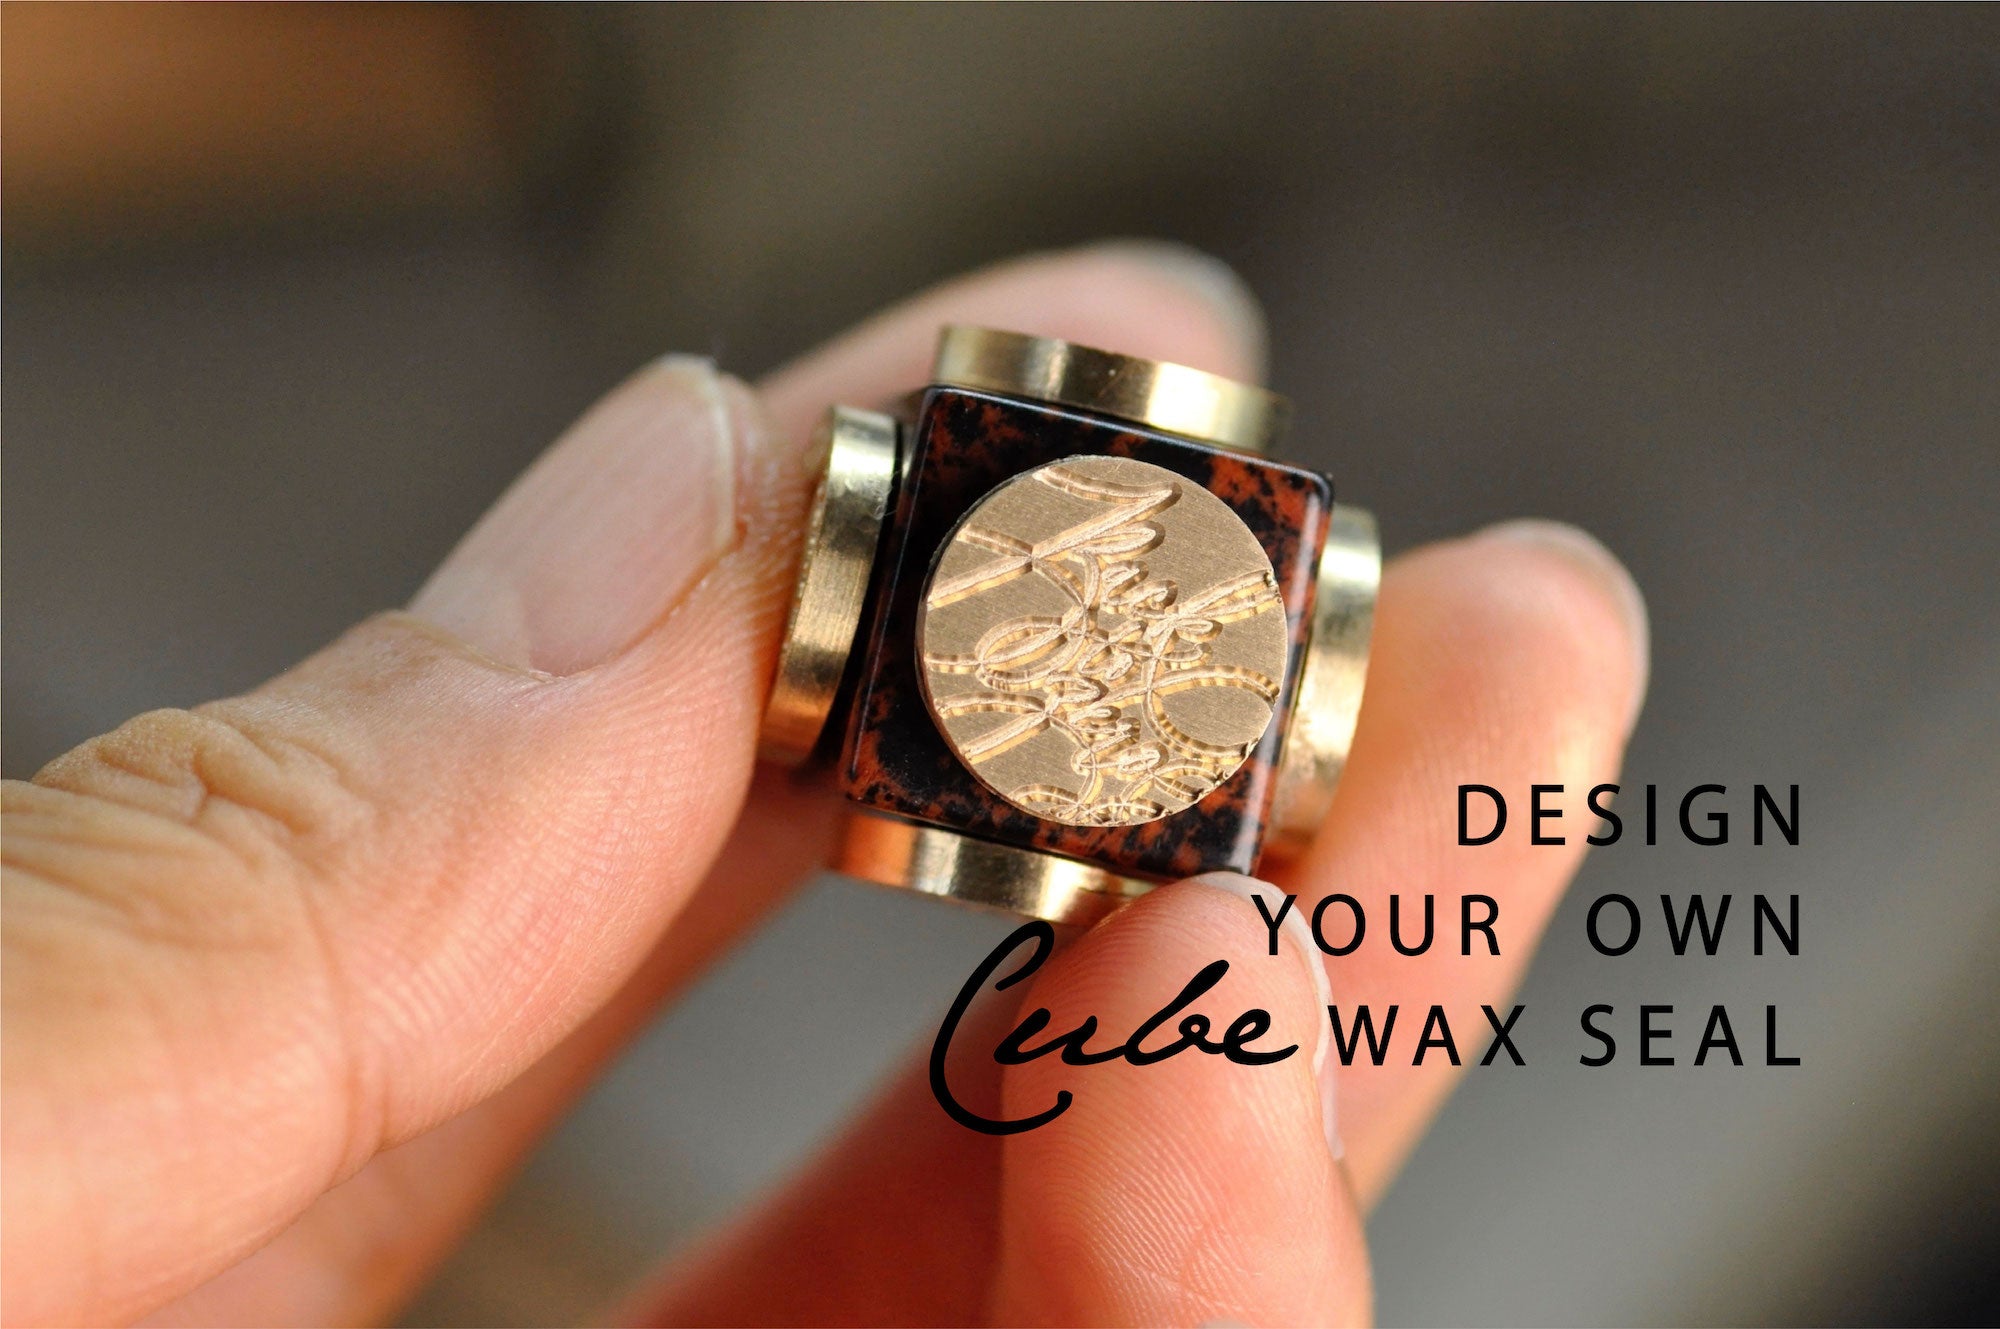 OOAK Design Your Own Cube Wax Seal | Mahopany Obsidian